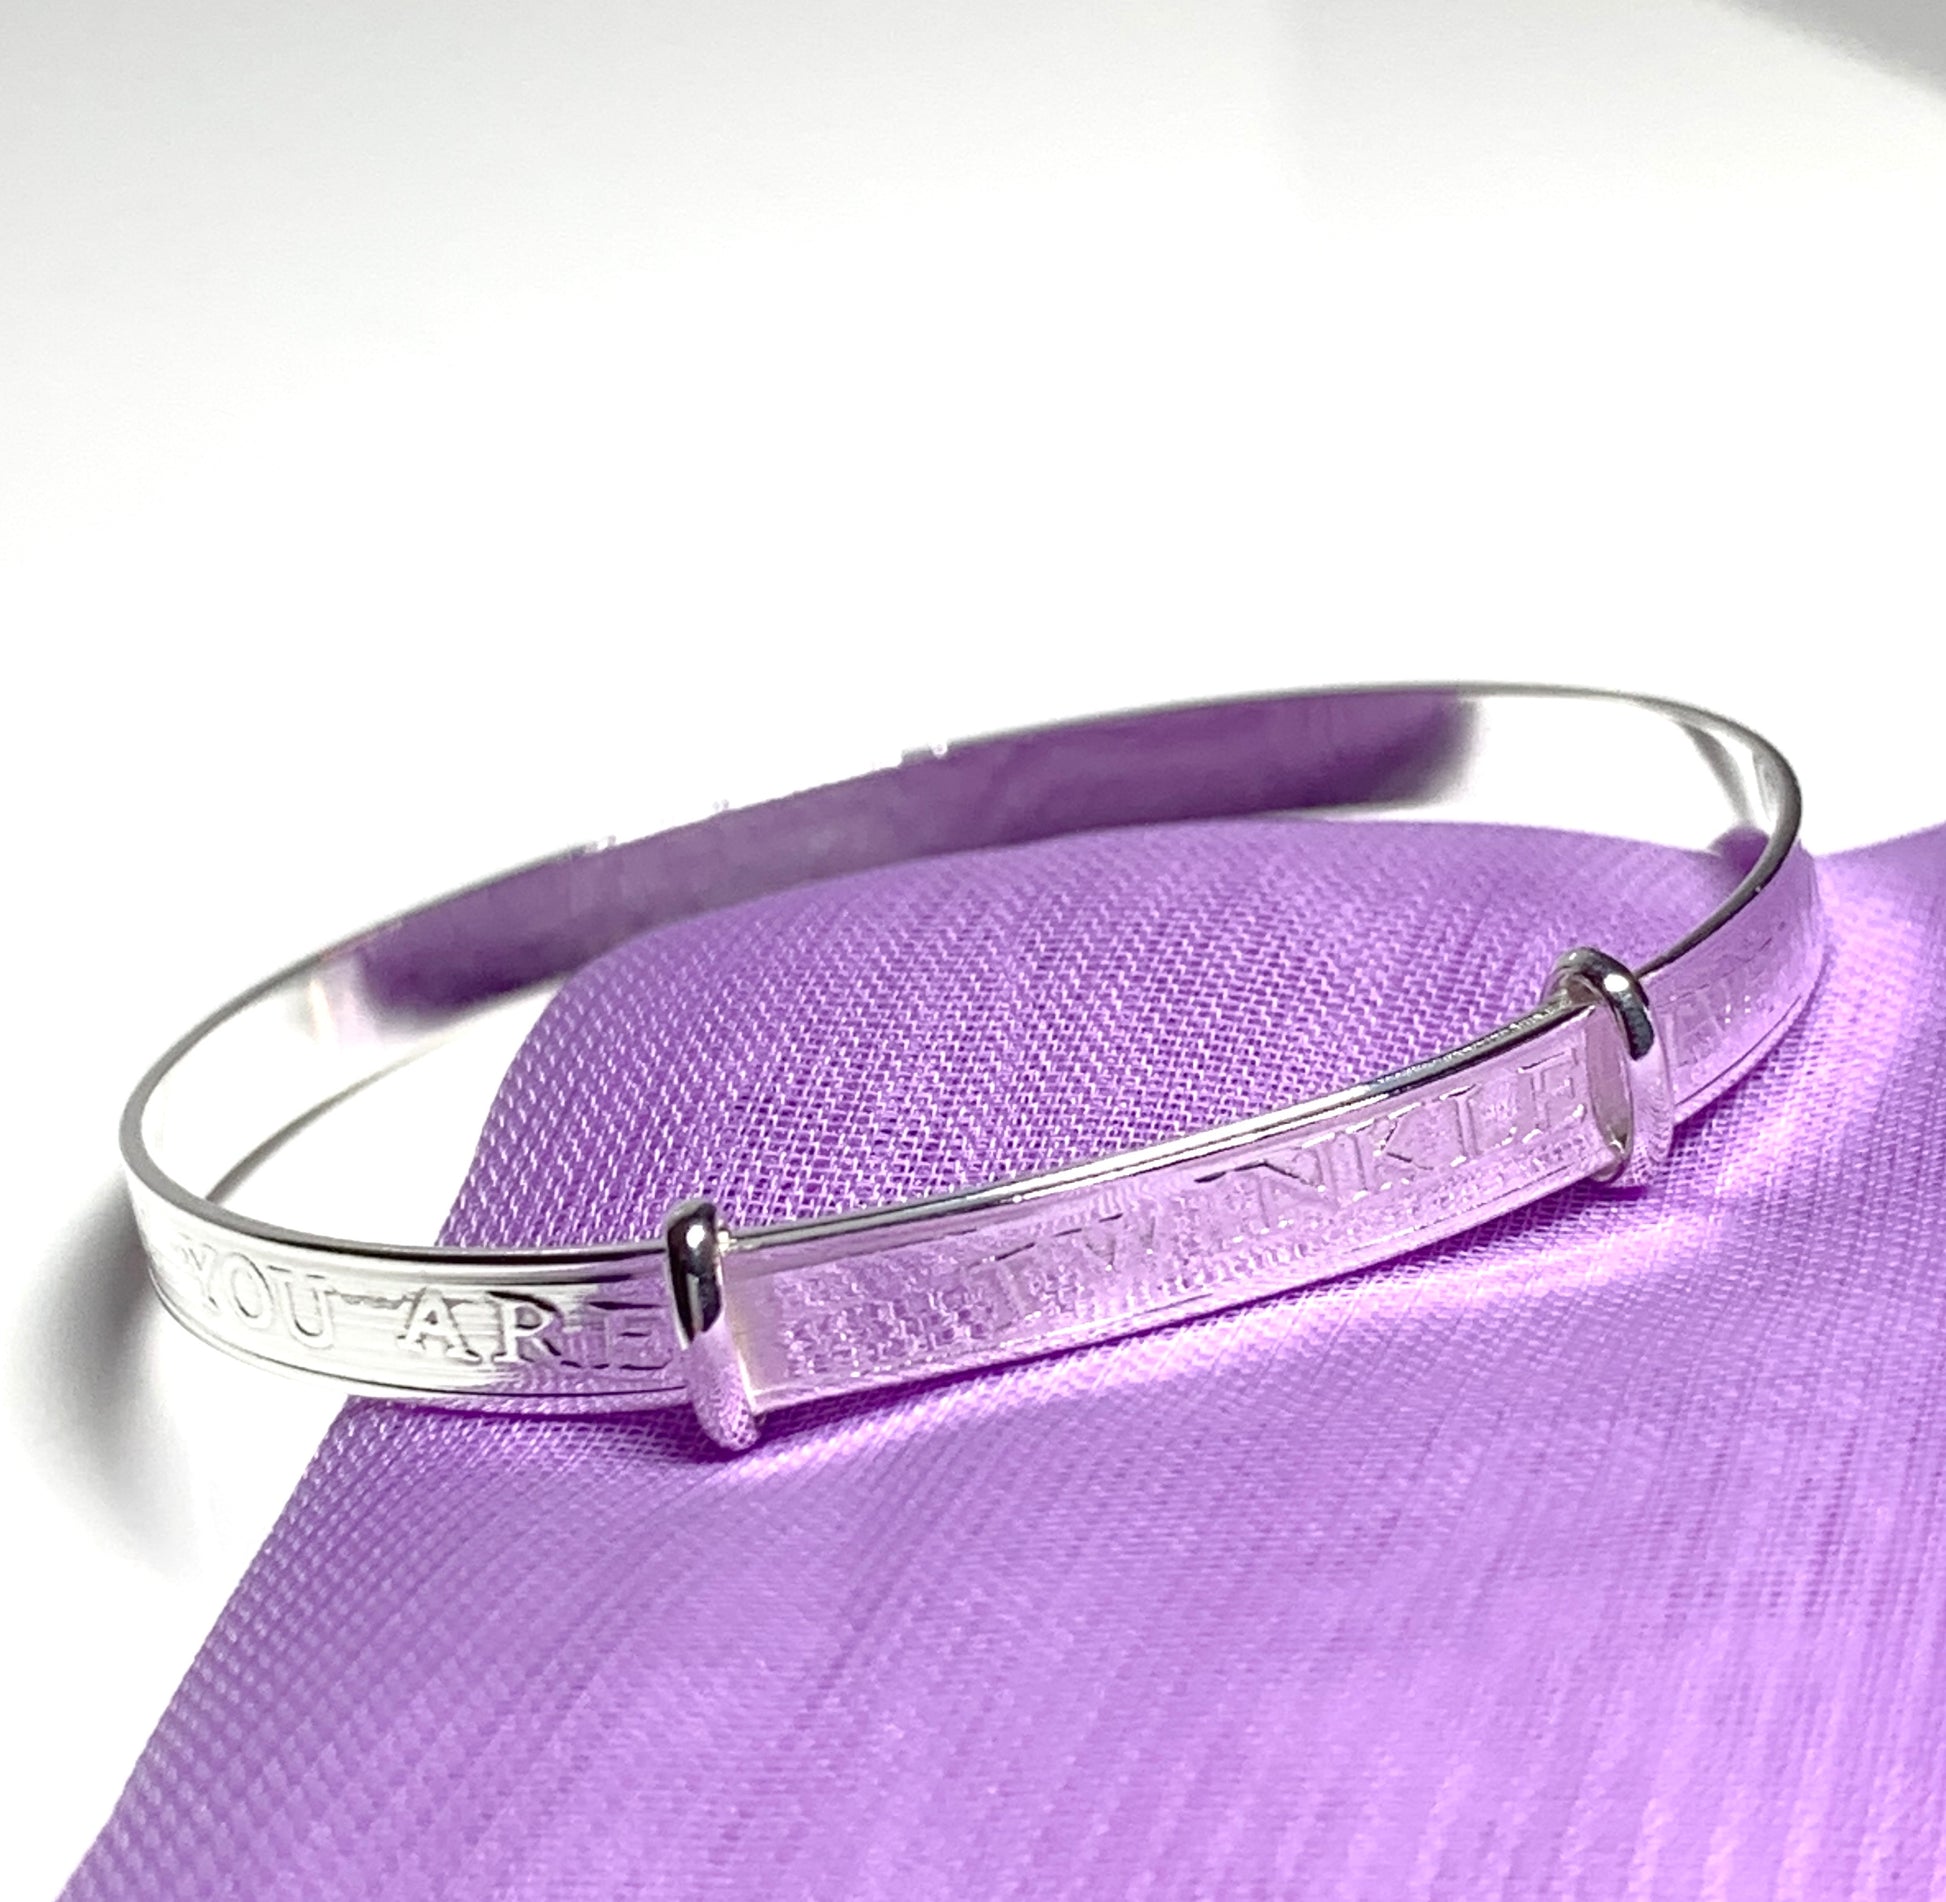 Twinkle Twinkle Little Star child’s expanding bangle design sterling silver